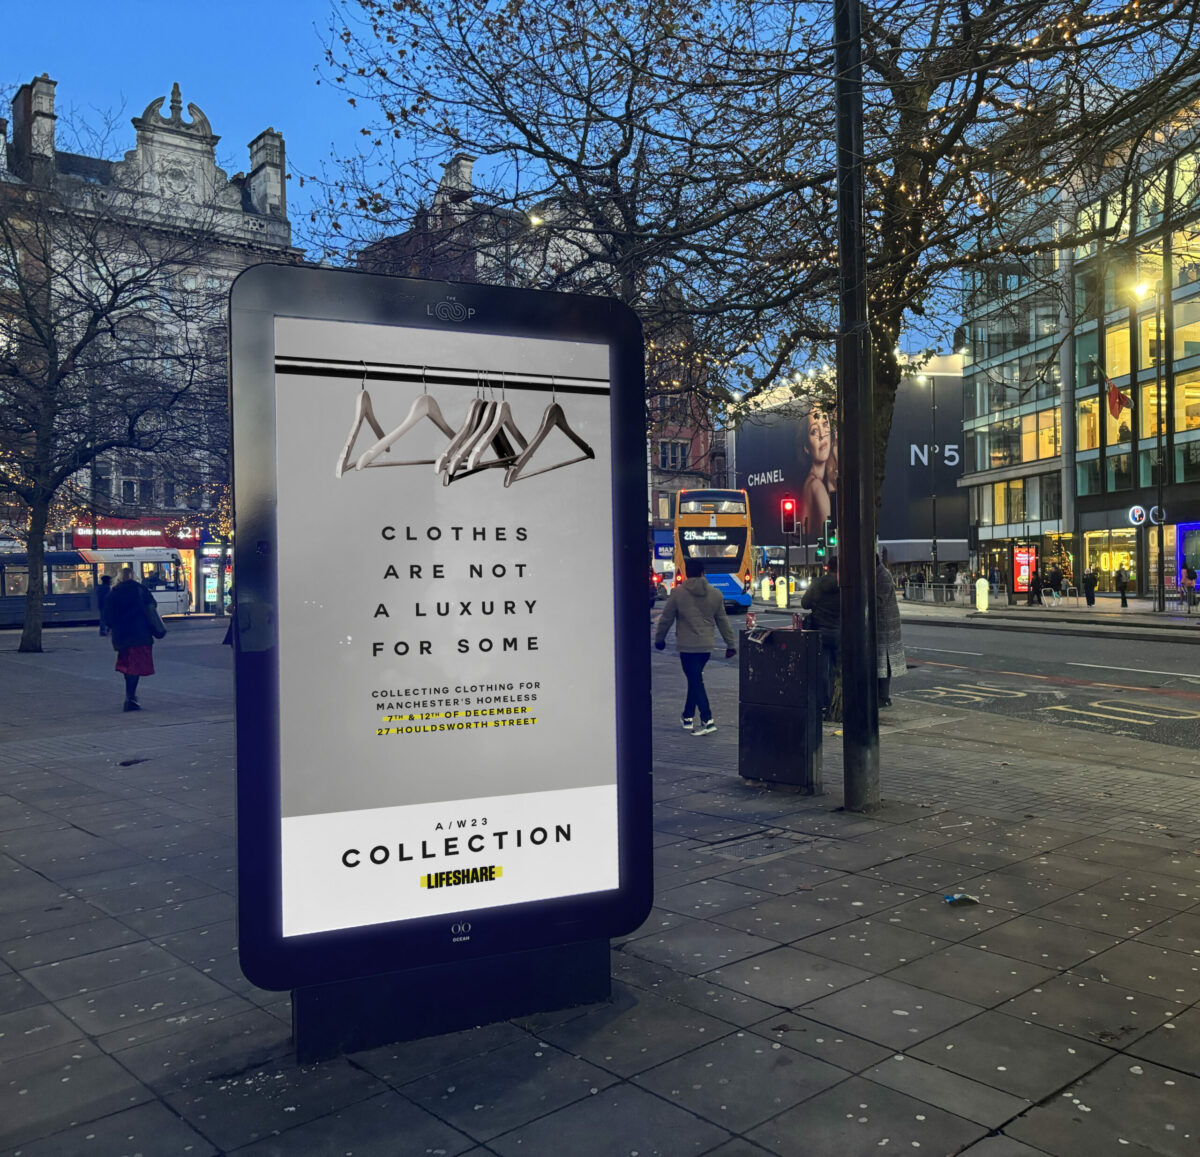 Lifeshare billboard reading "Clothes are not a luxury for some". Maxine Peake is fronting a campaign for Manchester's oldest homeless charity Lifeshare, which coincides with a Chanel's Metiers d'Art show which is currently taking place in the city.